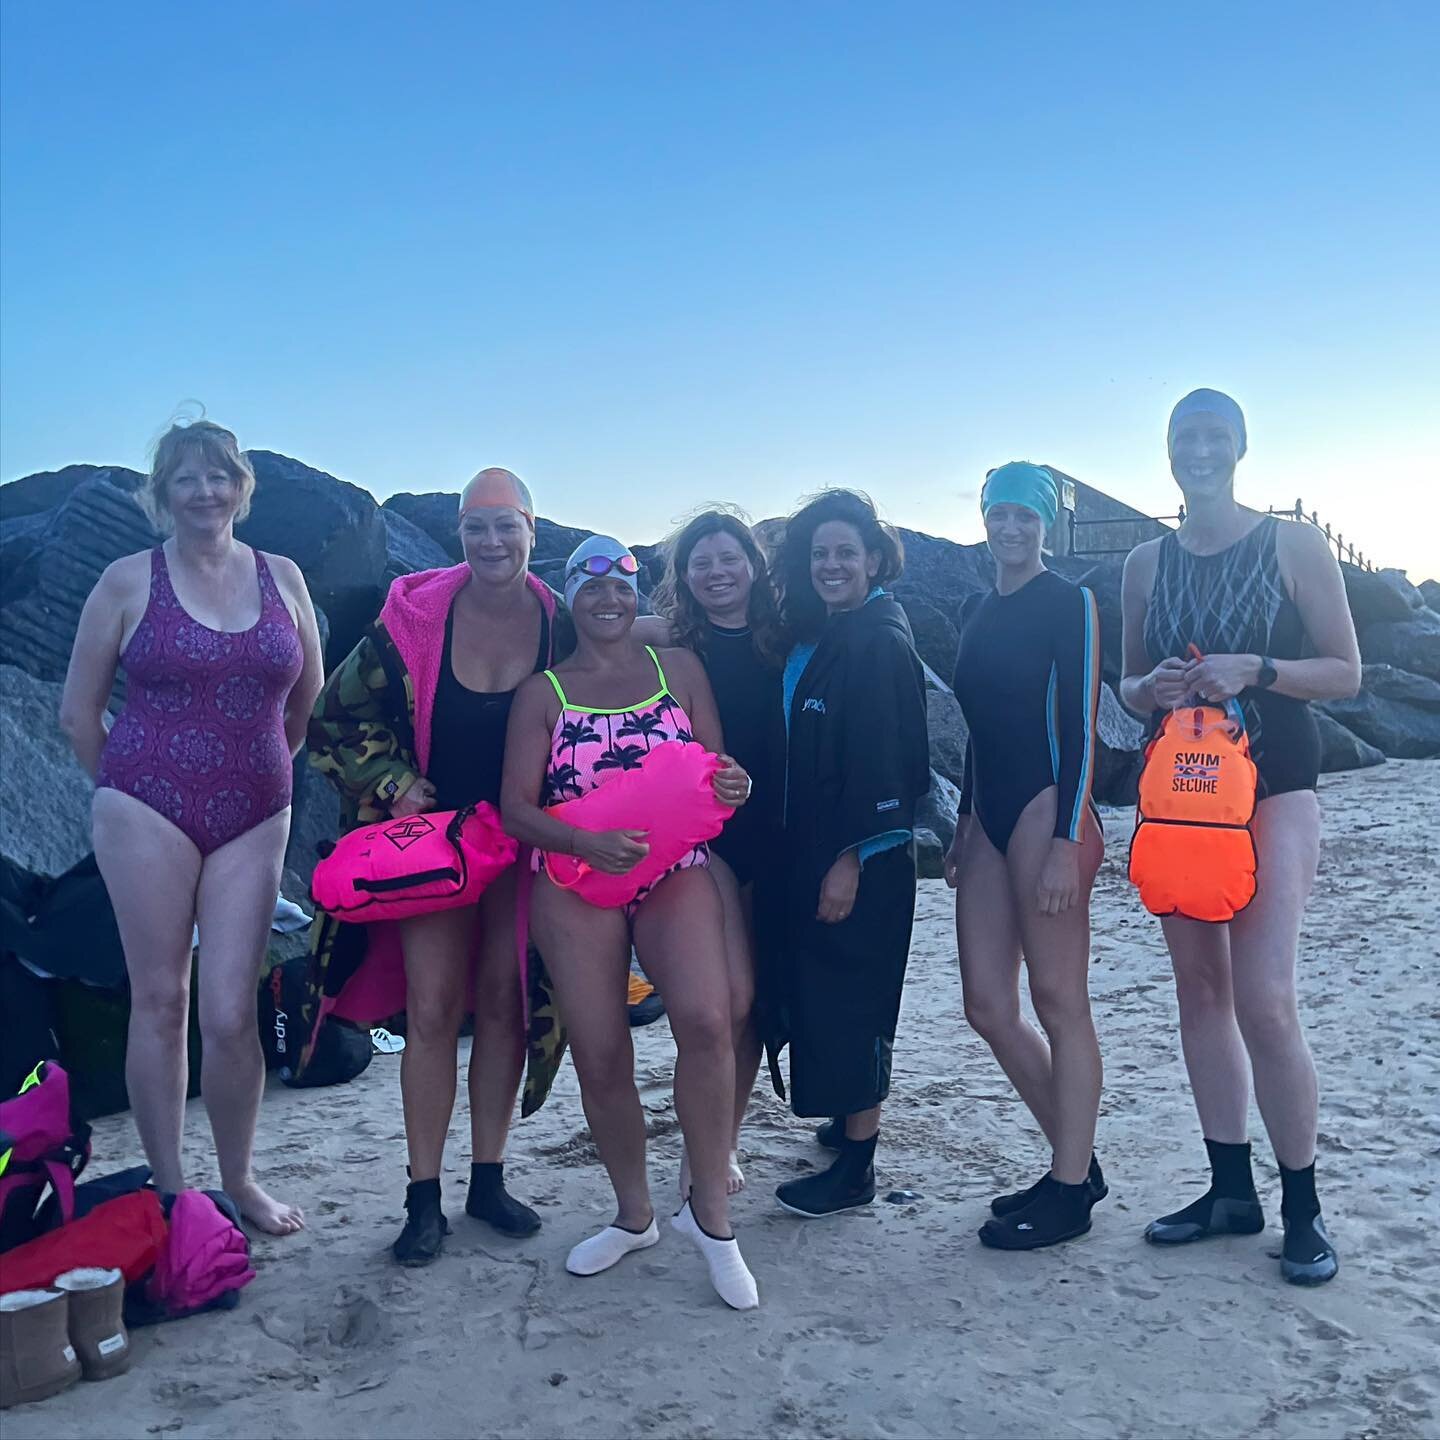 Sea swimming is fun, social and so great for your well-being. 

The Sandgate Seabirds had a fantastic night swim with @justinesolomons who&rsquo;s swimming her channel relay hopefully next week🤞 @phvi_channelswim2021.

Taking up sea swimming is one 